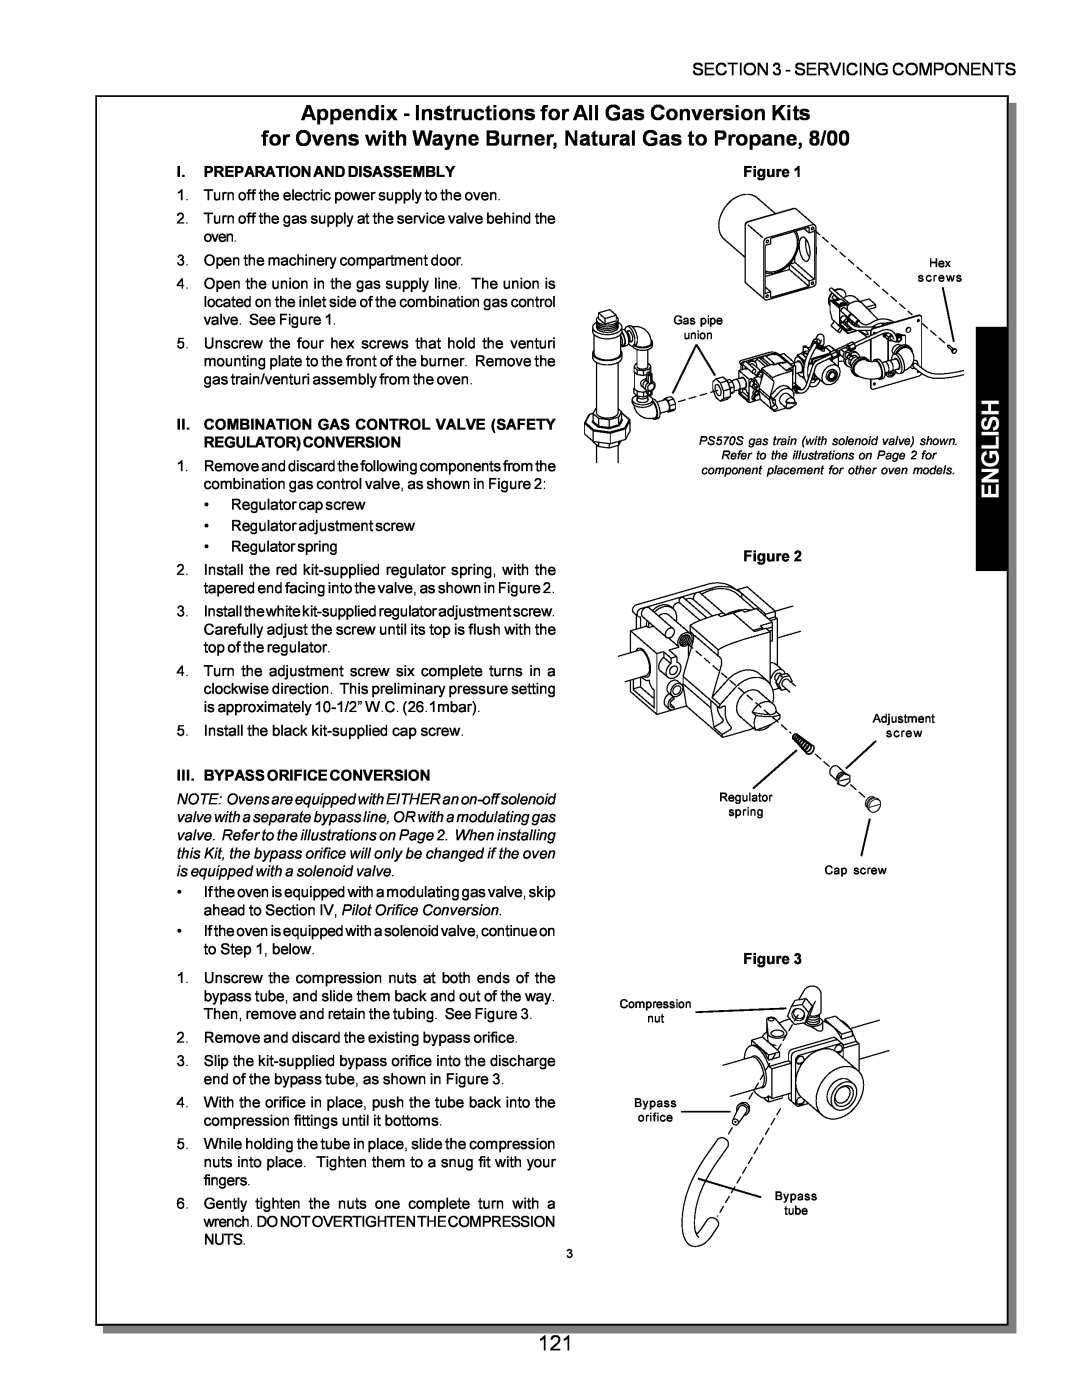 Middleby Marshall PS200 manual English, Appendix - Instructions for All Gas Conversion Kits, I. Preparation And Disassembly 